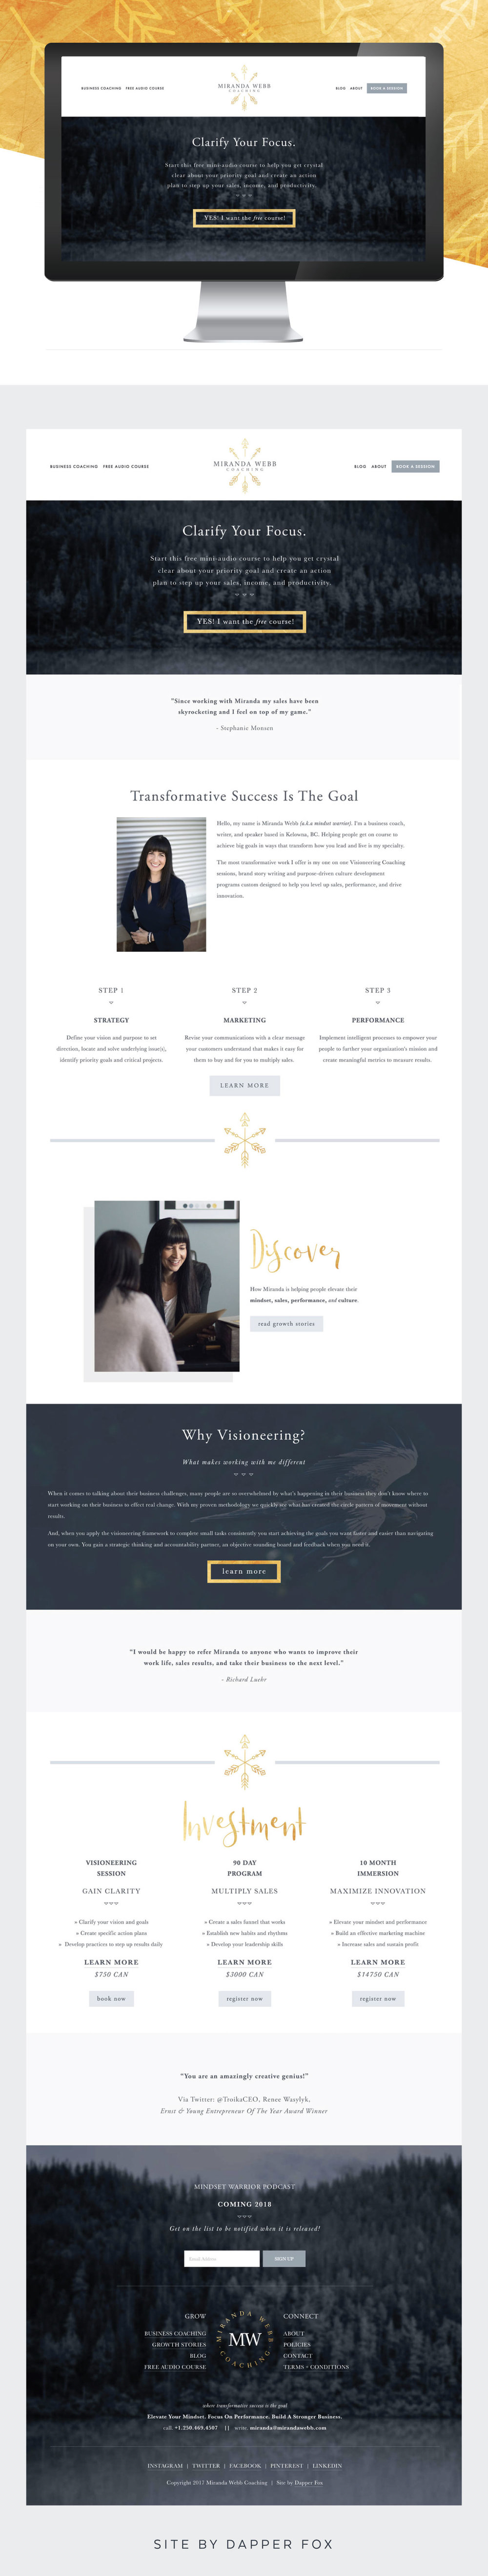 Miranda Webb Squarespace Website for Business Coaching - Modern, Full Banner Forest Imagery with Gold, Greys and Neutral Color palette